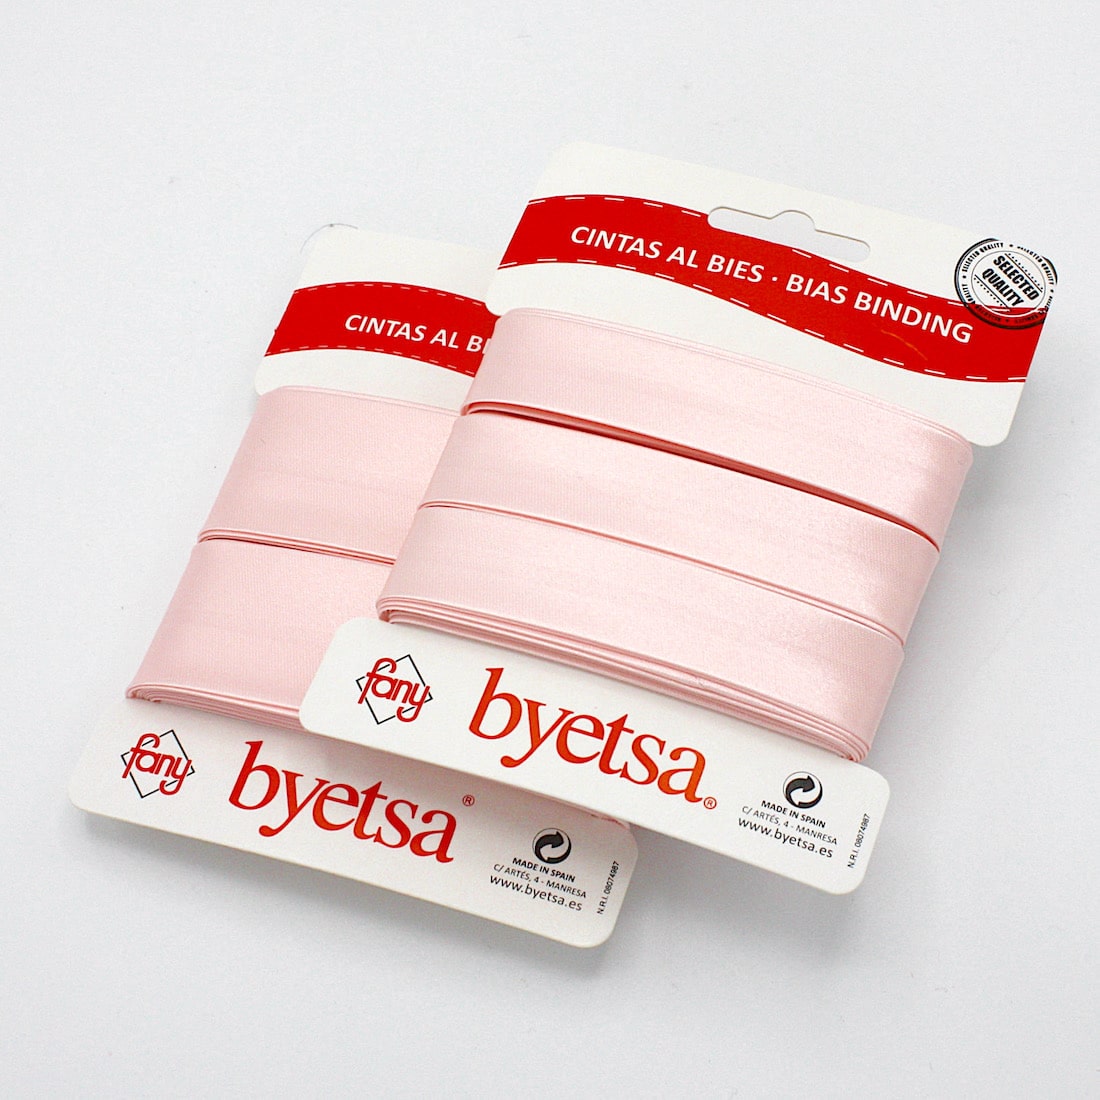 5 metres of Pre-packed Satin Bias Binding Tape in 18mm and 30mm width in Powder Pink 31